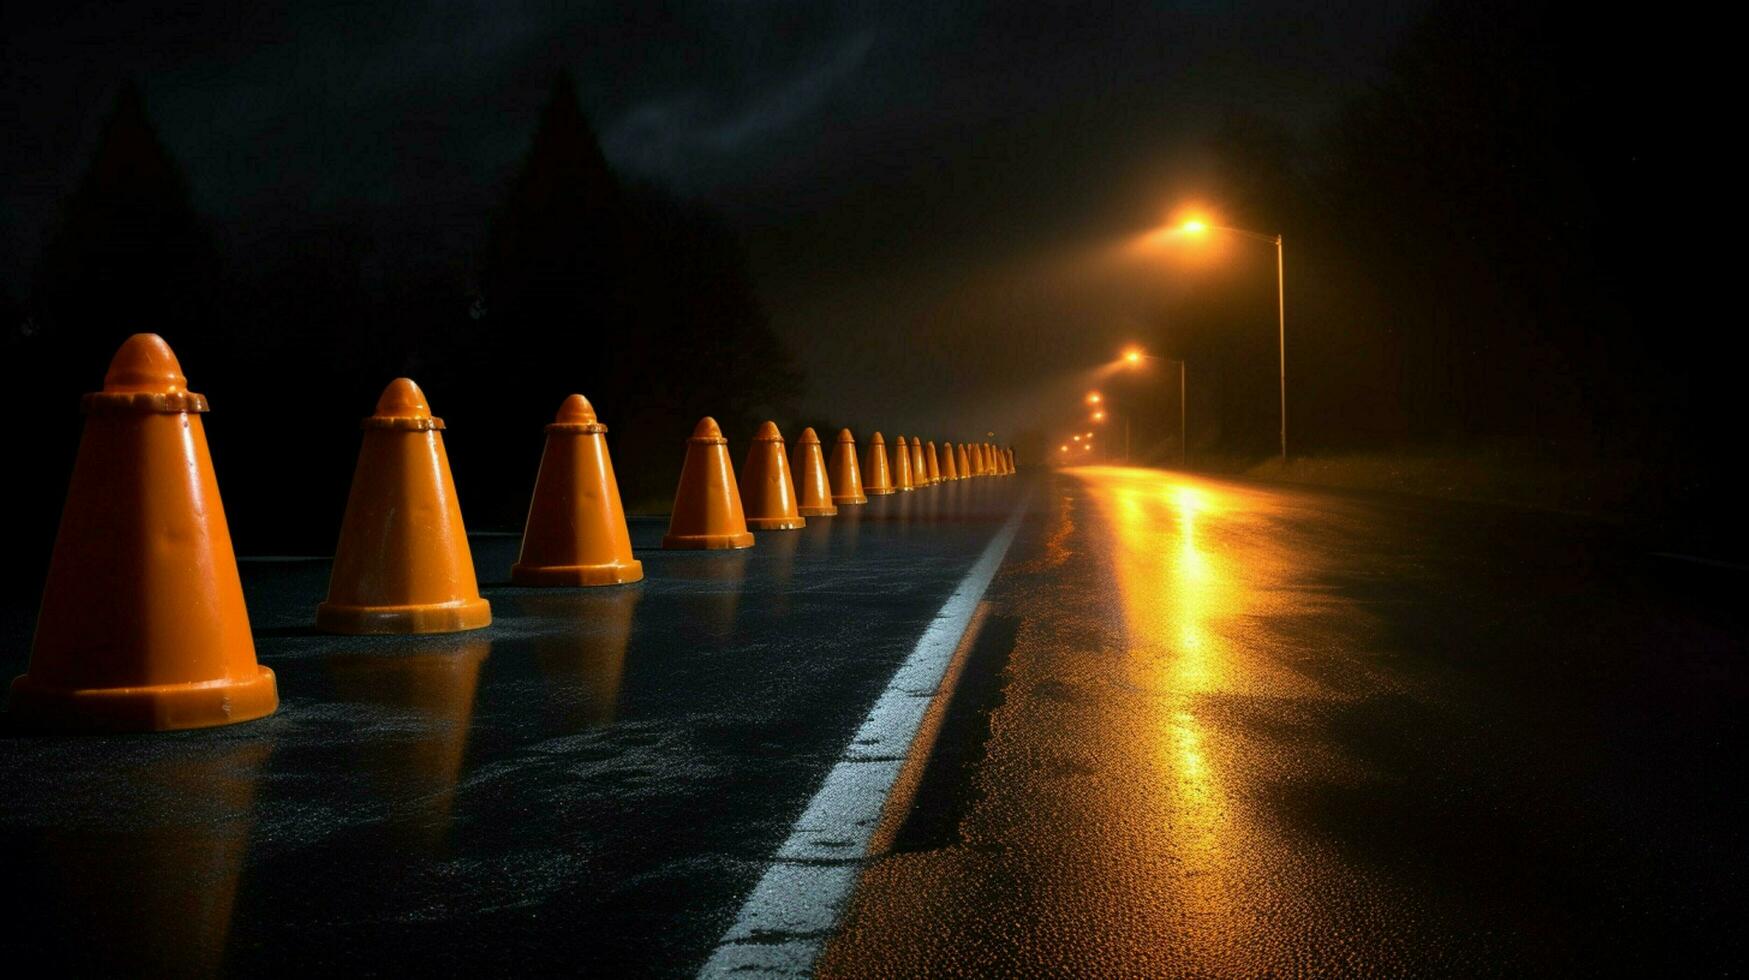 a row of traffic cones on a deserted road photo